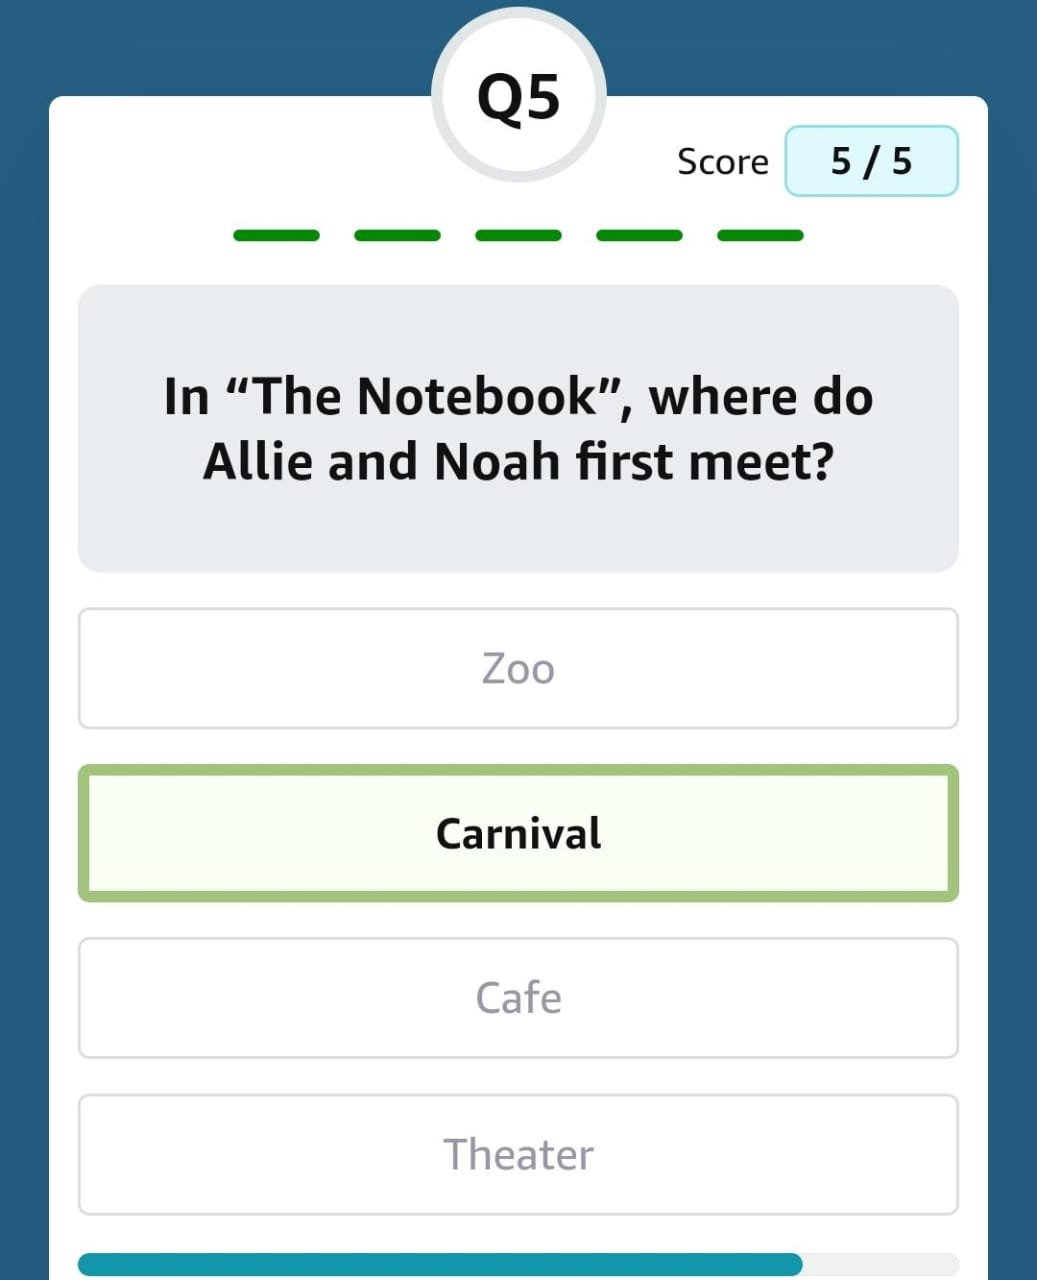 In “The Notebook”, where do Allie and Noah first meet?